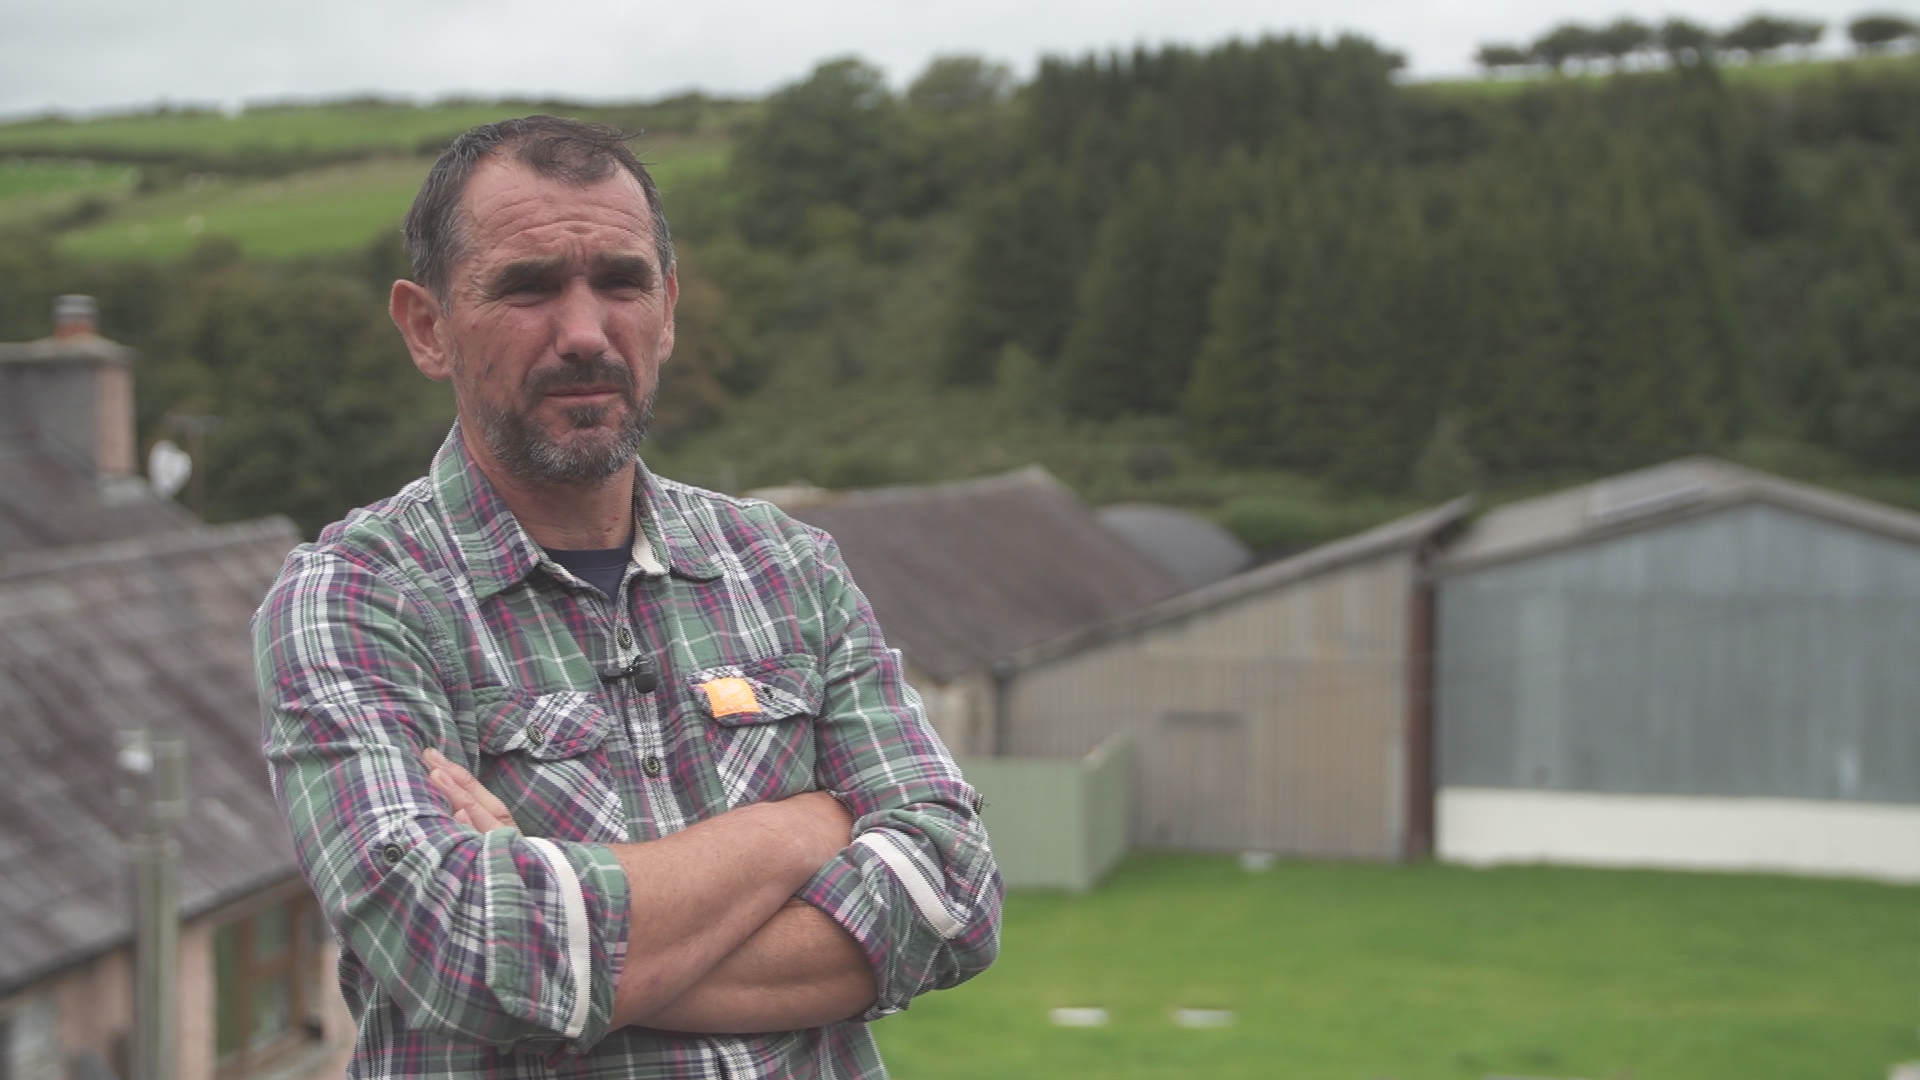 carmarthenshire-farmer-unable-to-power-farm-on-solar-panels-because-of